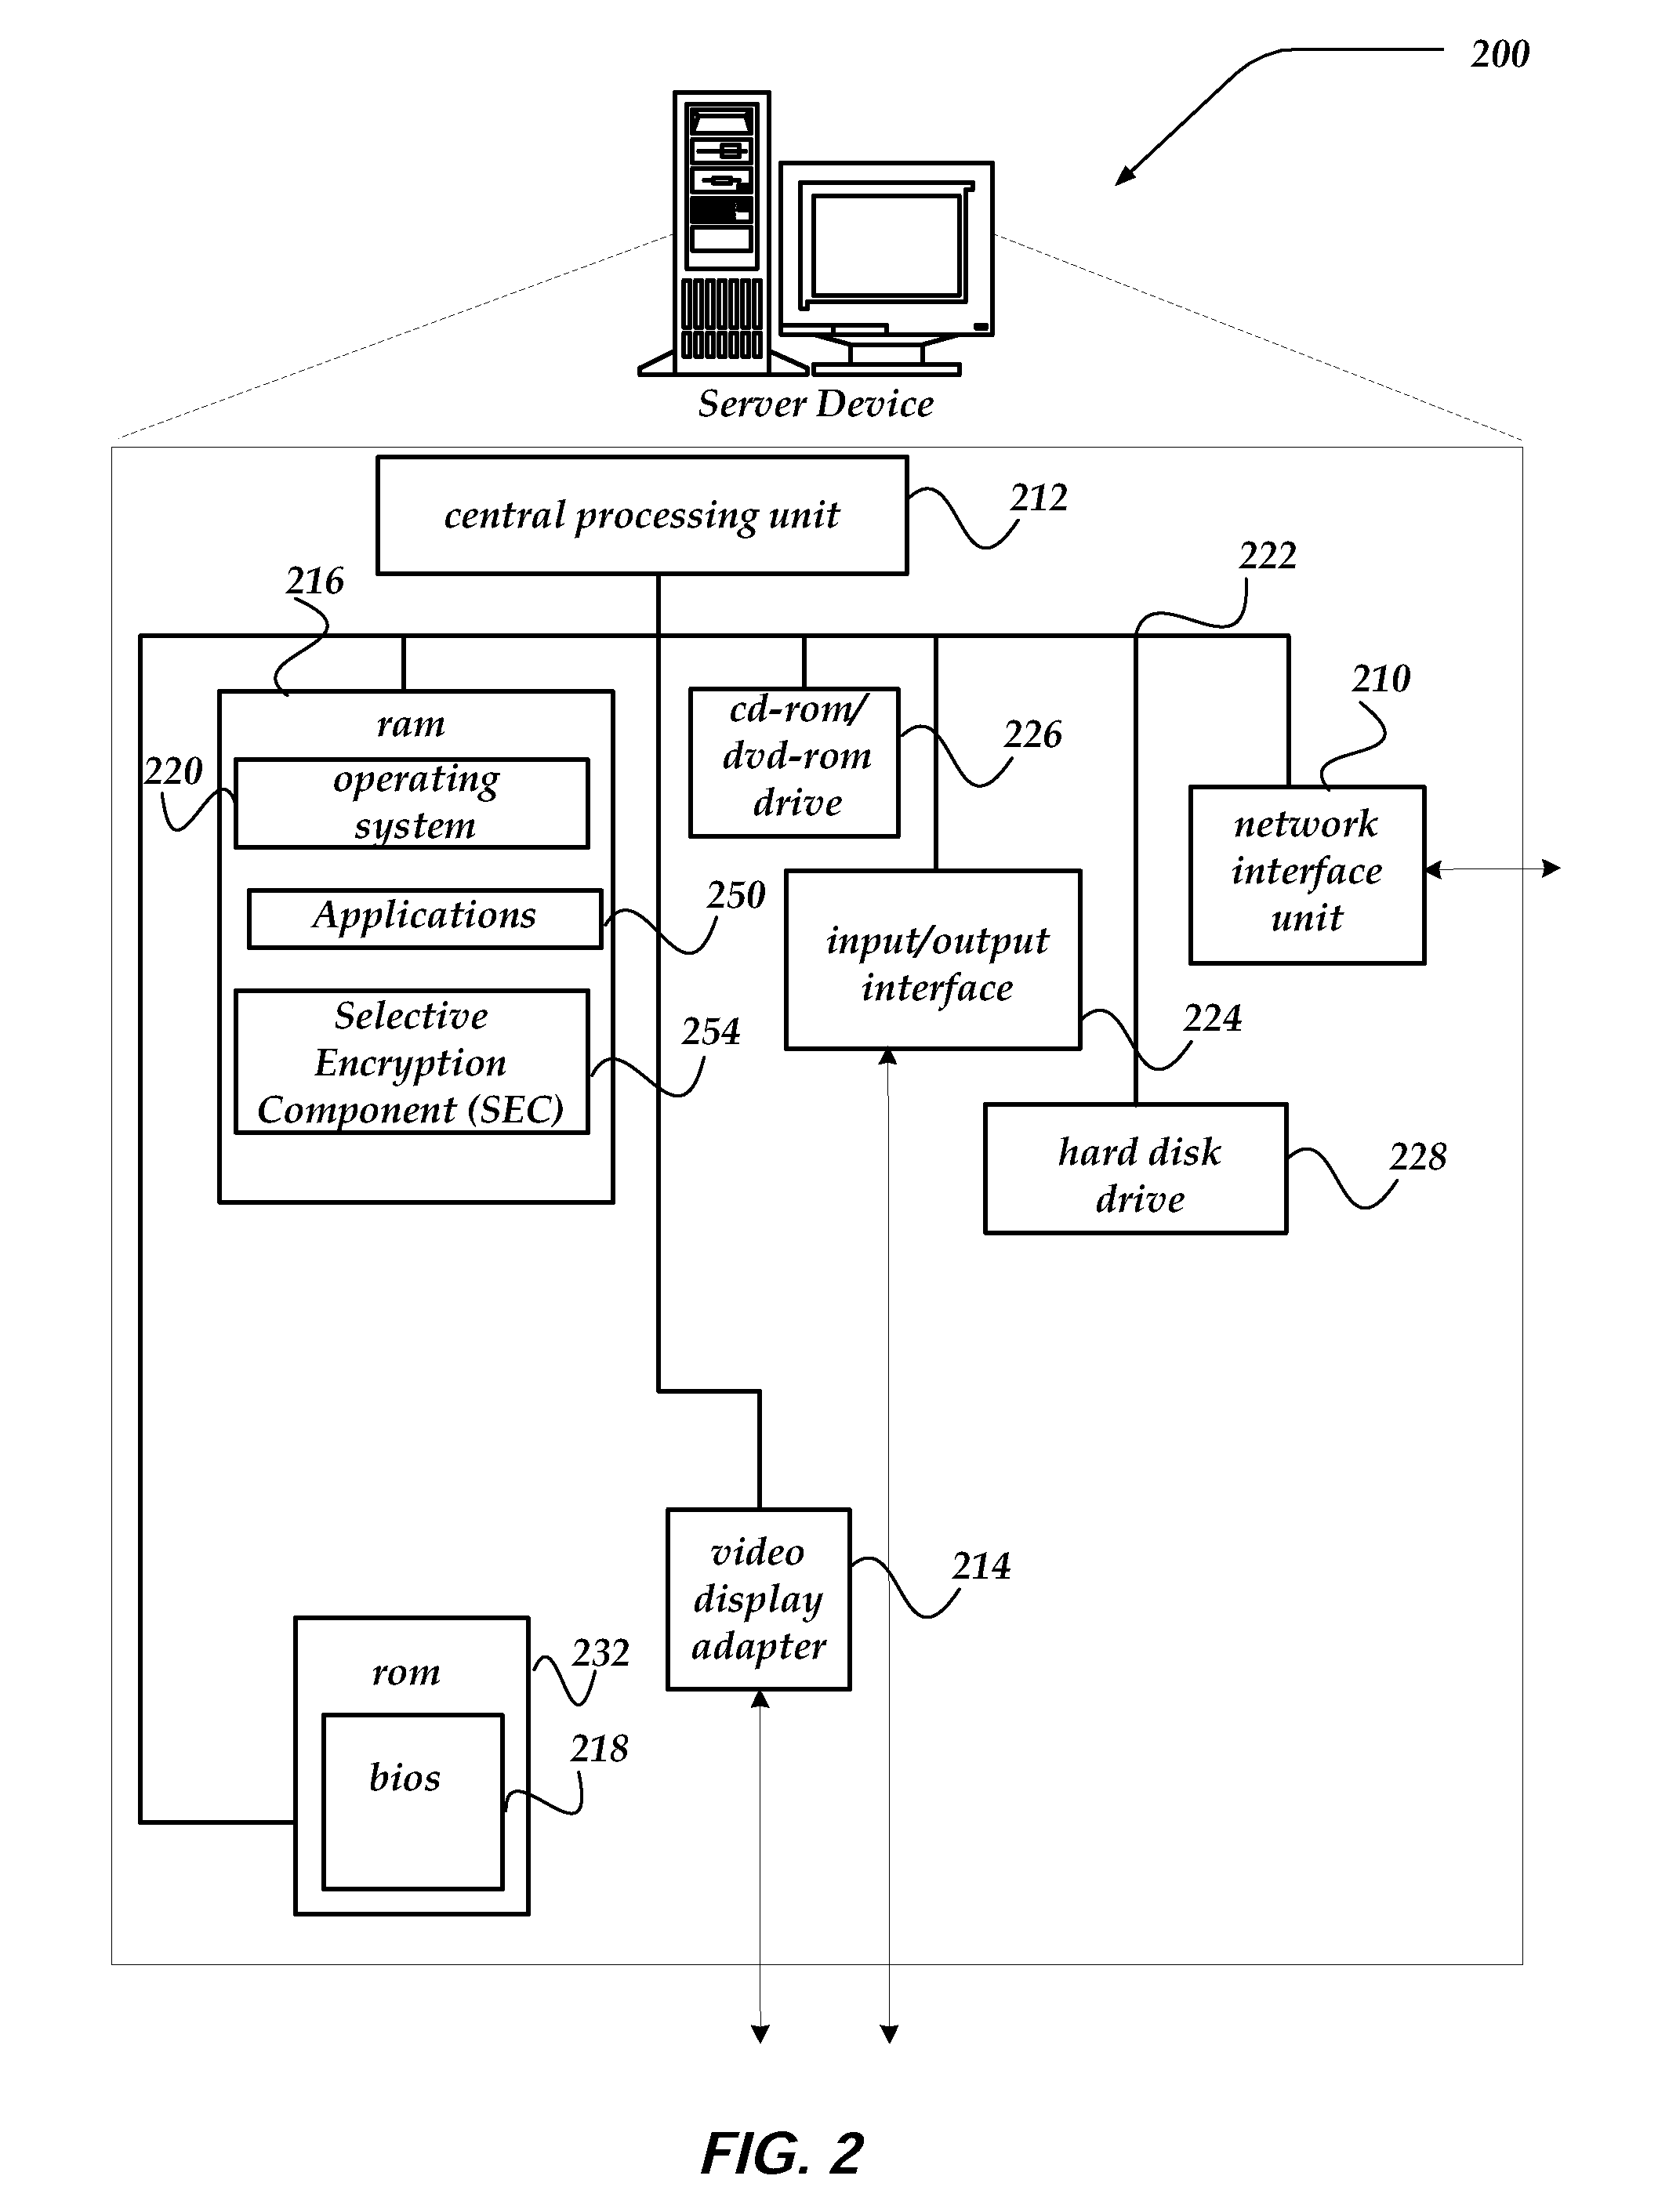 Selective and persistent application level encrytion for video provided to a client